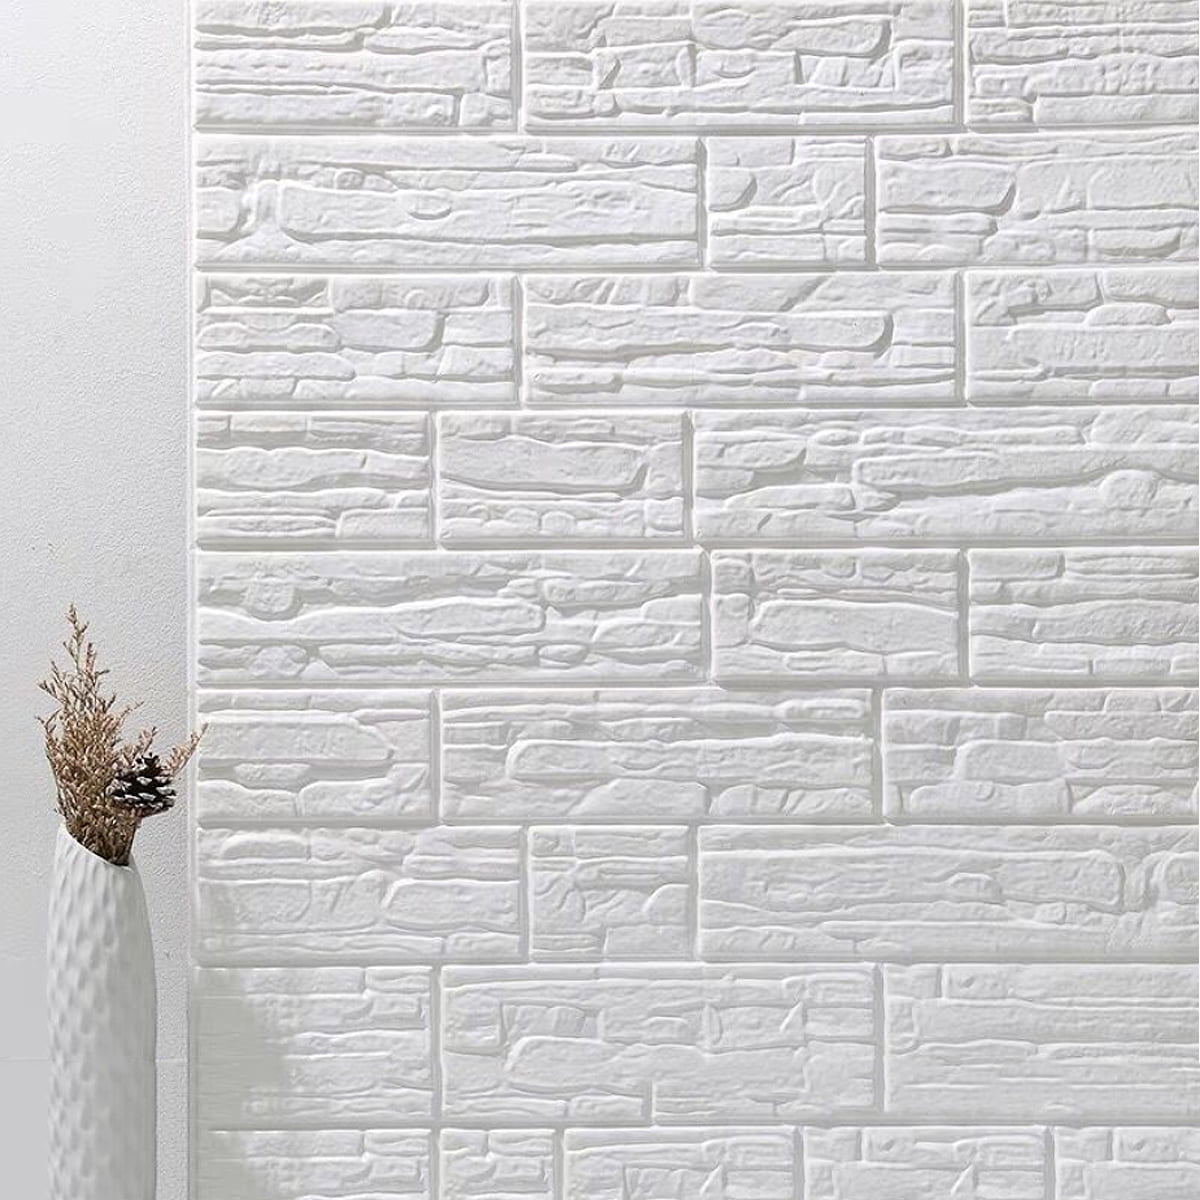 Details about   2/4Pcs 3D Tile Brick Wall Sticker Self-Adhesive Wall Panels Pad Background Plate